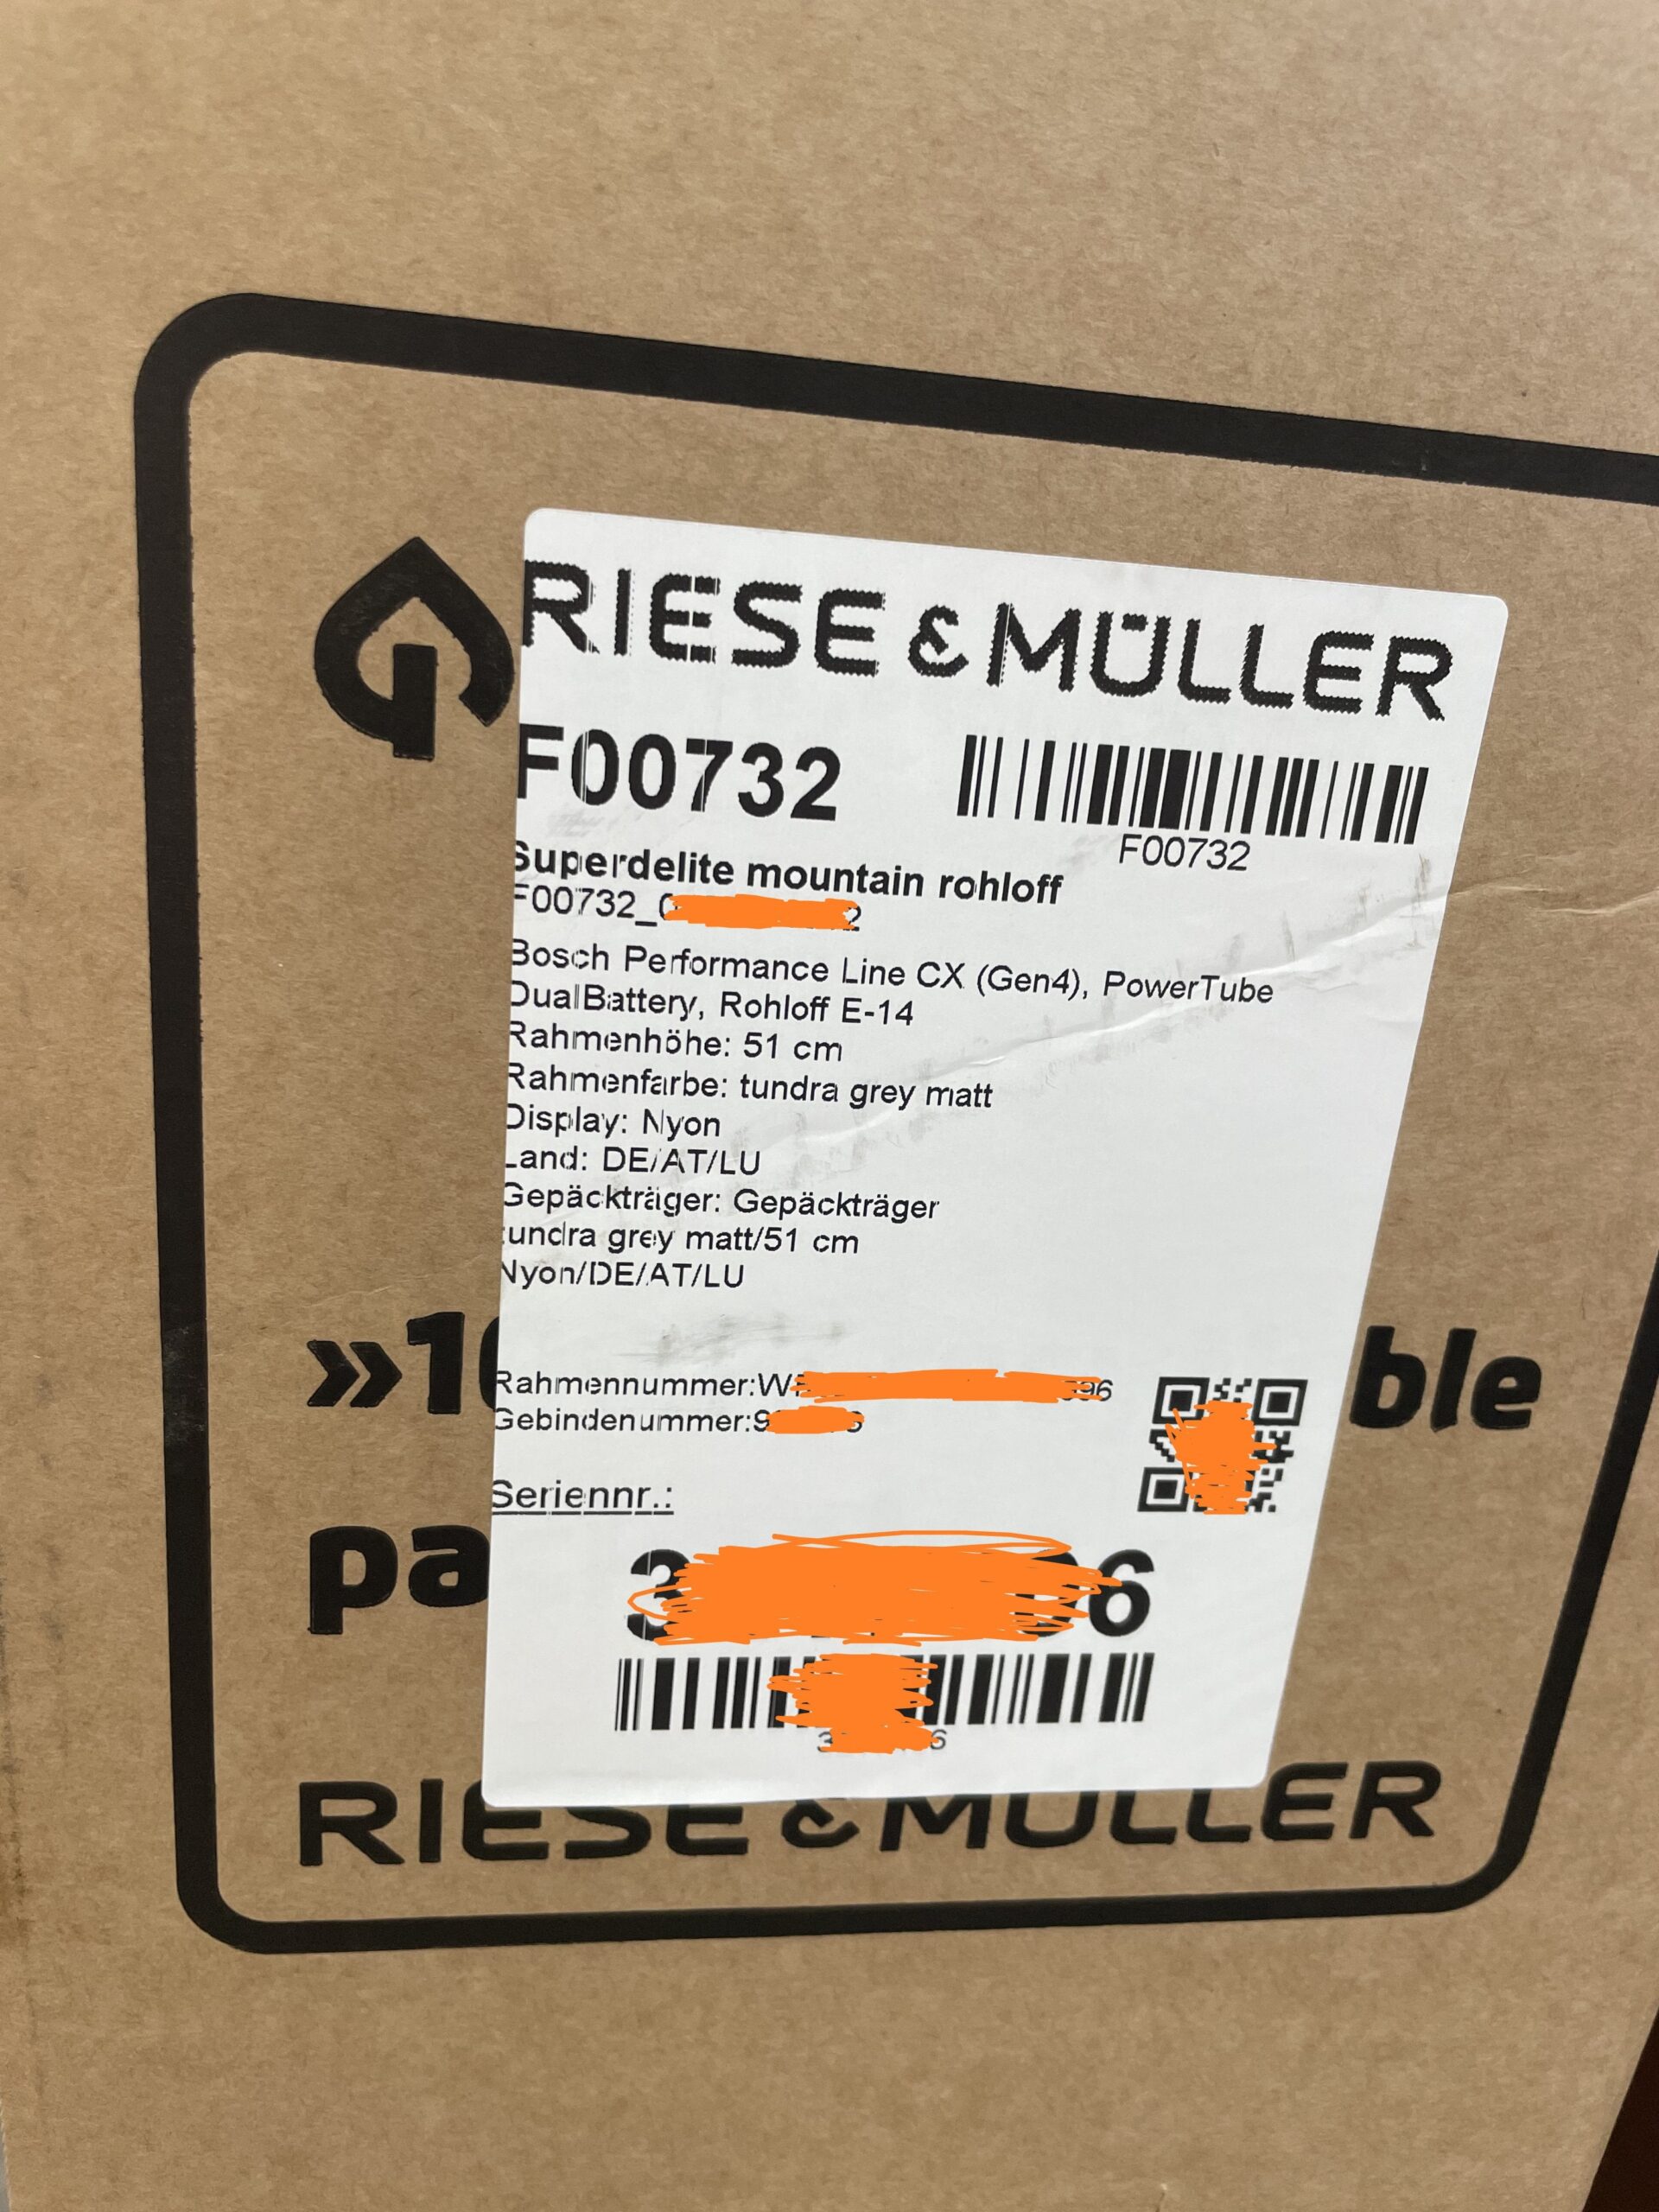 What would you add to the ultimate ebike? My Riese&Müller is finally being shipped, after half a year of backorder and re-configurations!